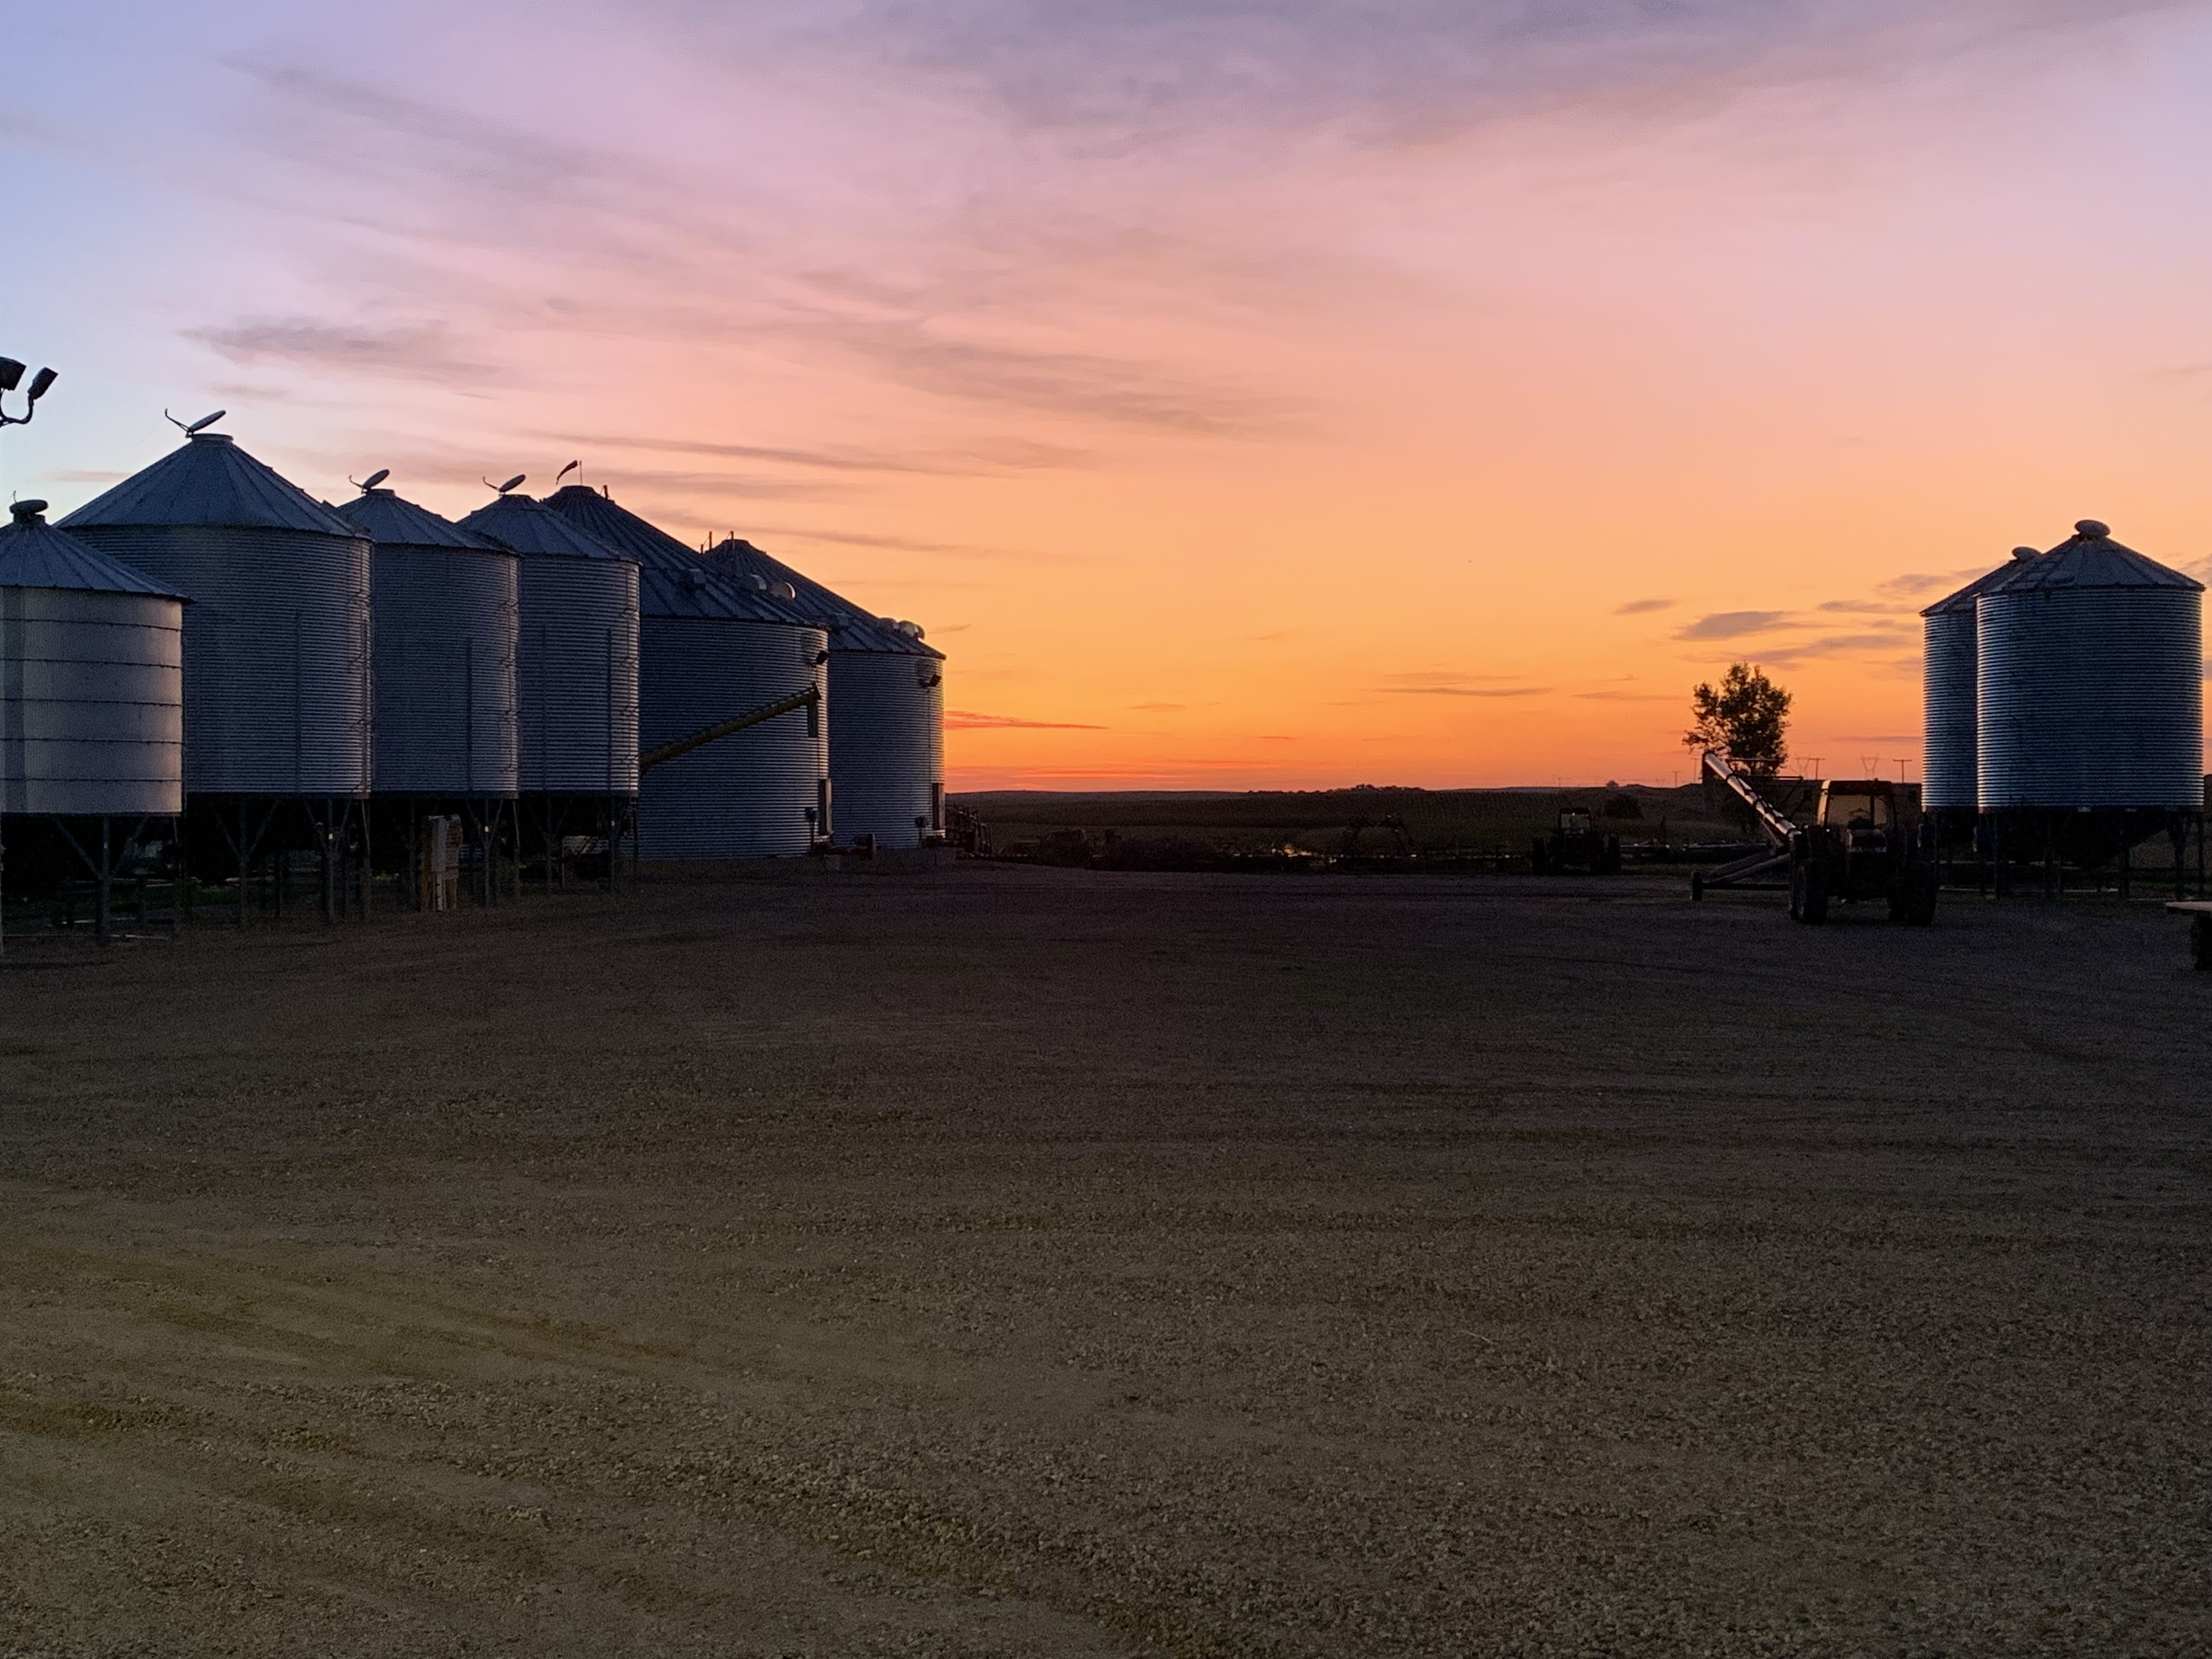 Mid-morning Ag News, April 16, 2021: Farm safety should be top of mind as producers begin the planting season